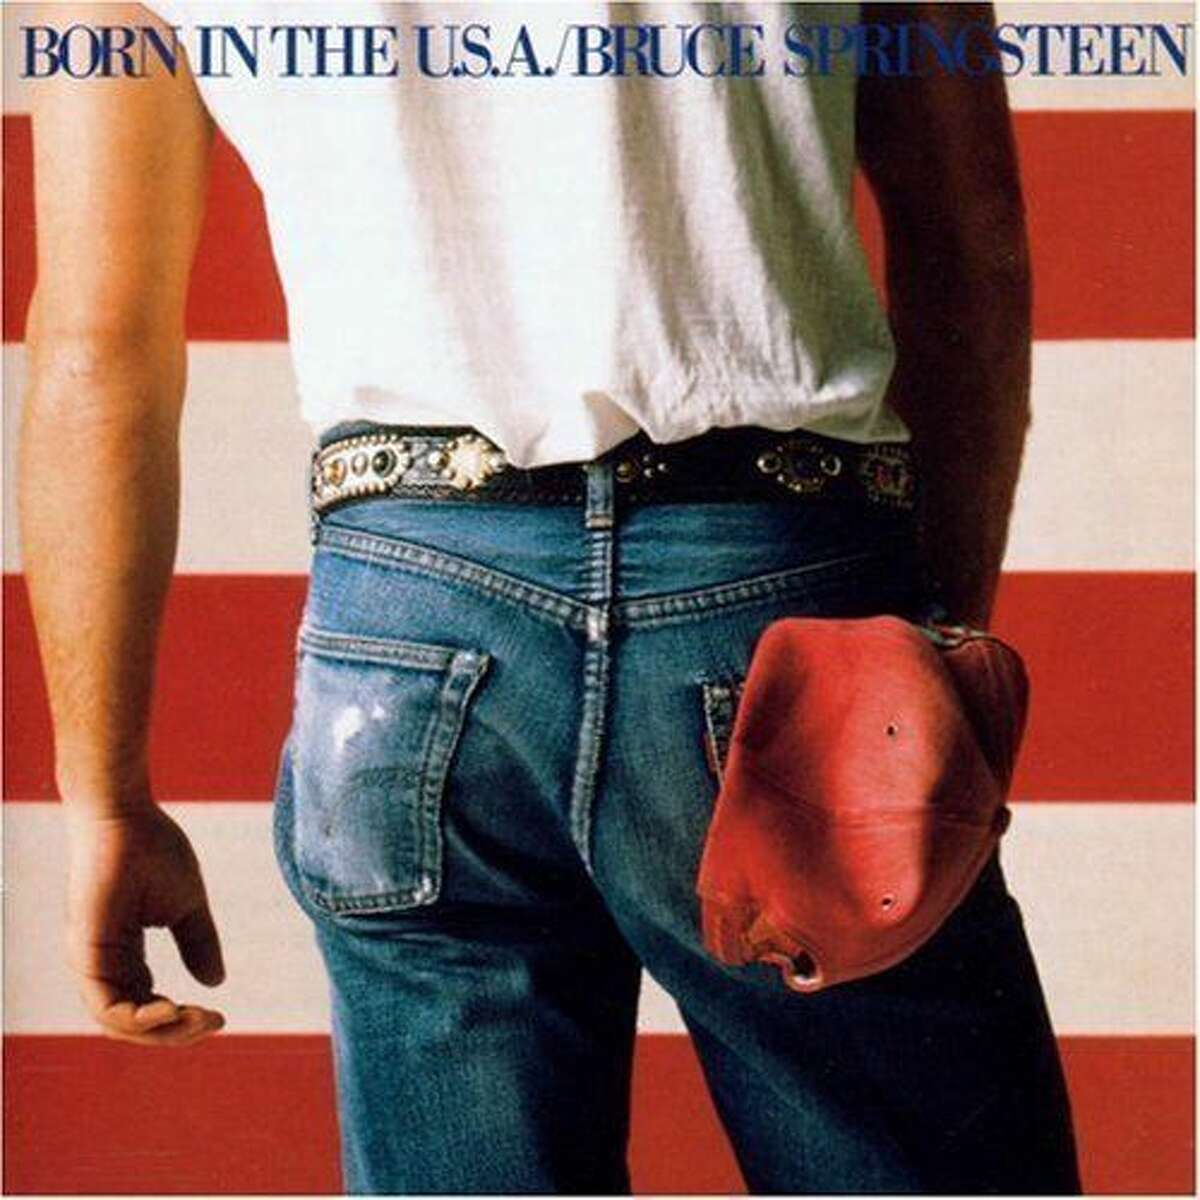 Bruce Springsteen "Born in the U.S.A." may be the most misunderstood and yet most overused song ever to grace a campaign rally. Springsteen has objected to its use (or misuse, if you listen to the lyrics) since Ronald Reagan used it in 1984. Since then, Bob Dole and Pat Buchanan have also gotten in the act.